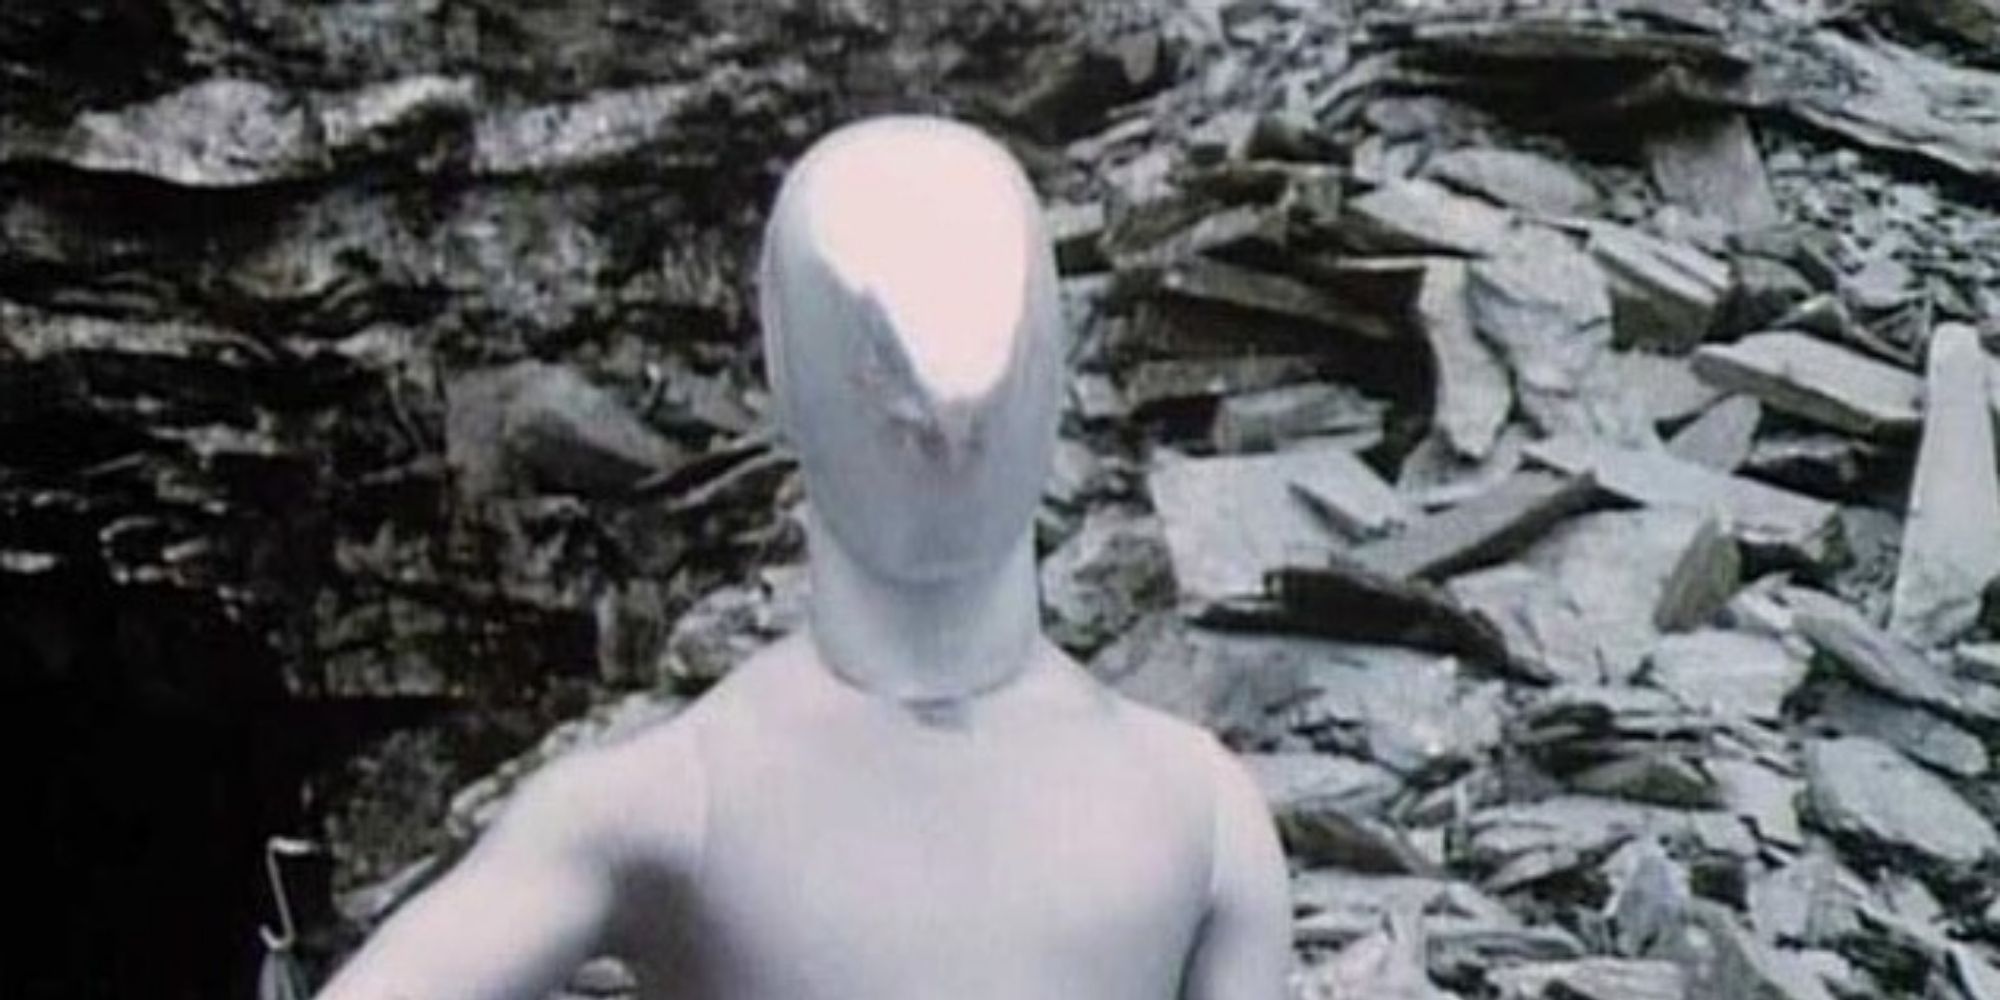 Official image of the Raston, an alien from the TV show Doctor Who.